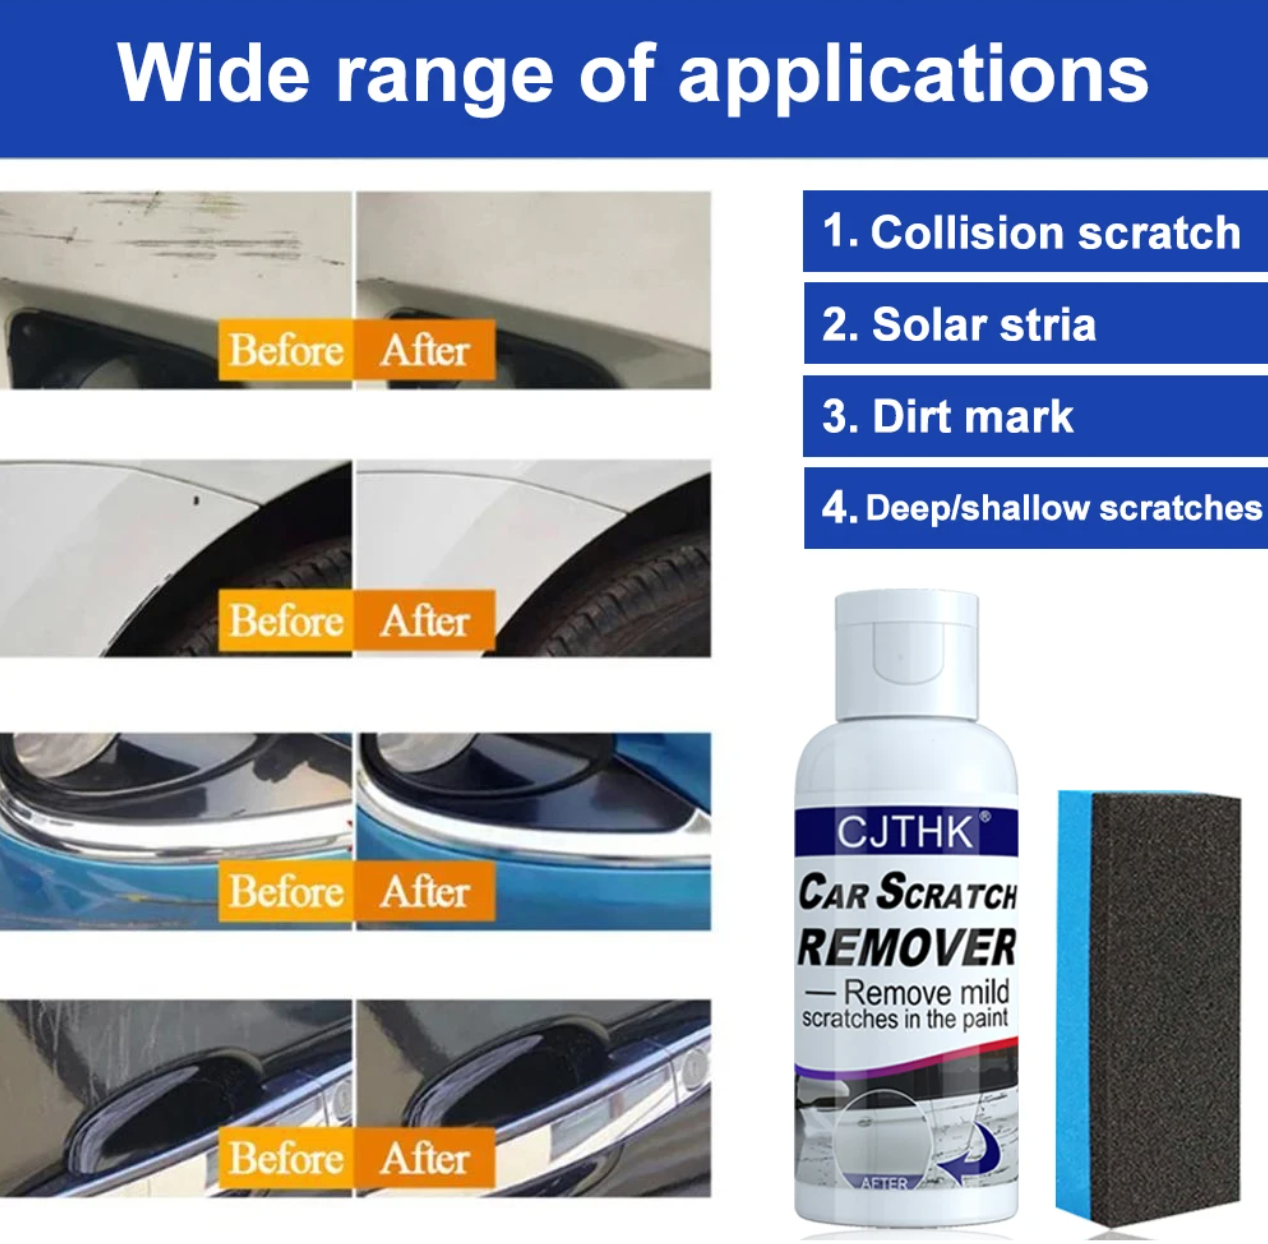 🔥Limited Offer 23% OFF🔥 Car Scratch Remover